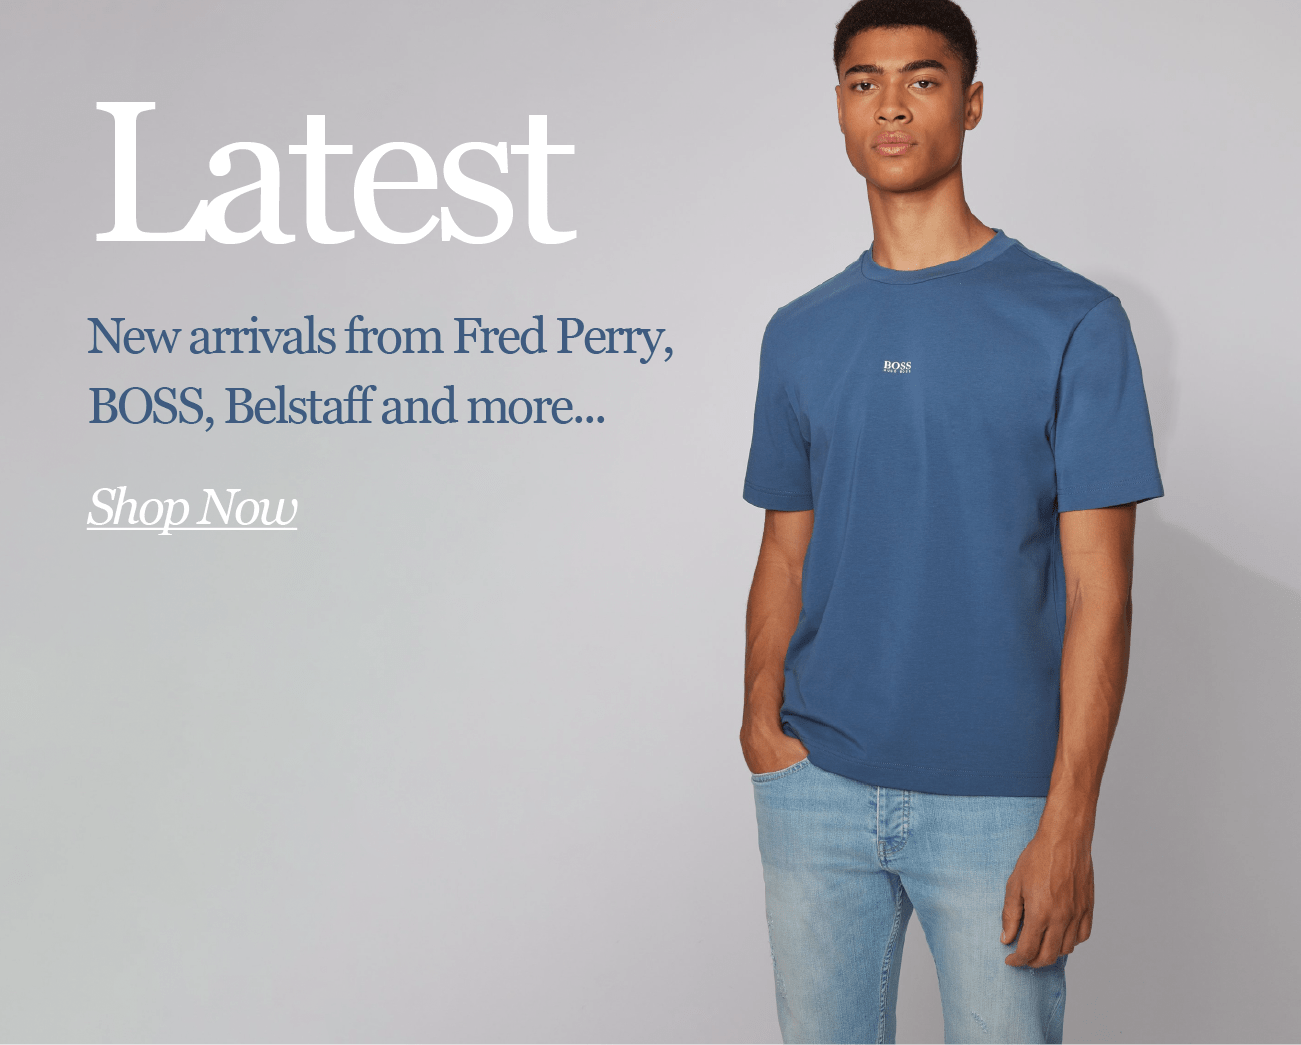 Latest 
New Arrivals from Fred Perry, BOSS, Belstaff and more...

Shop Now